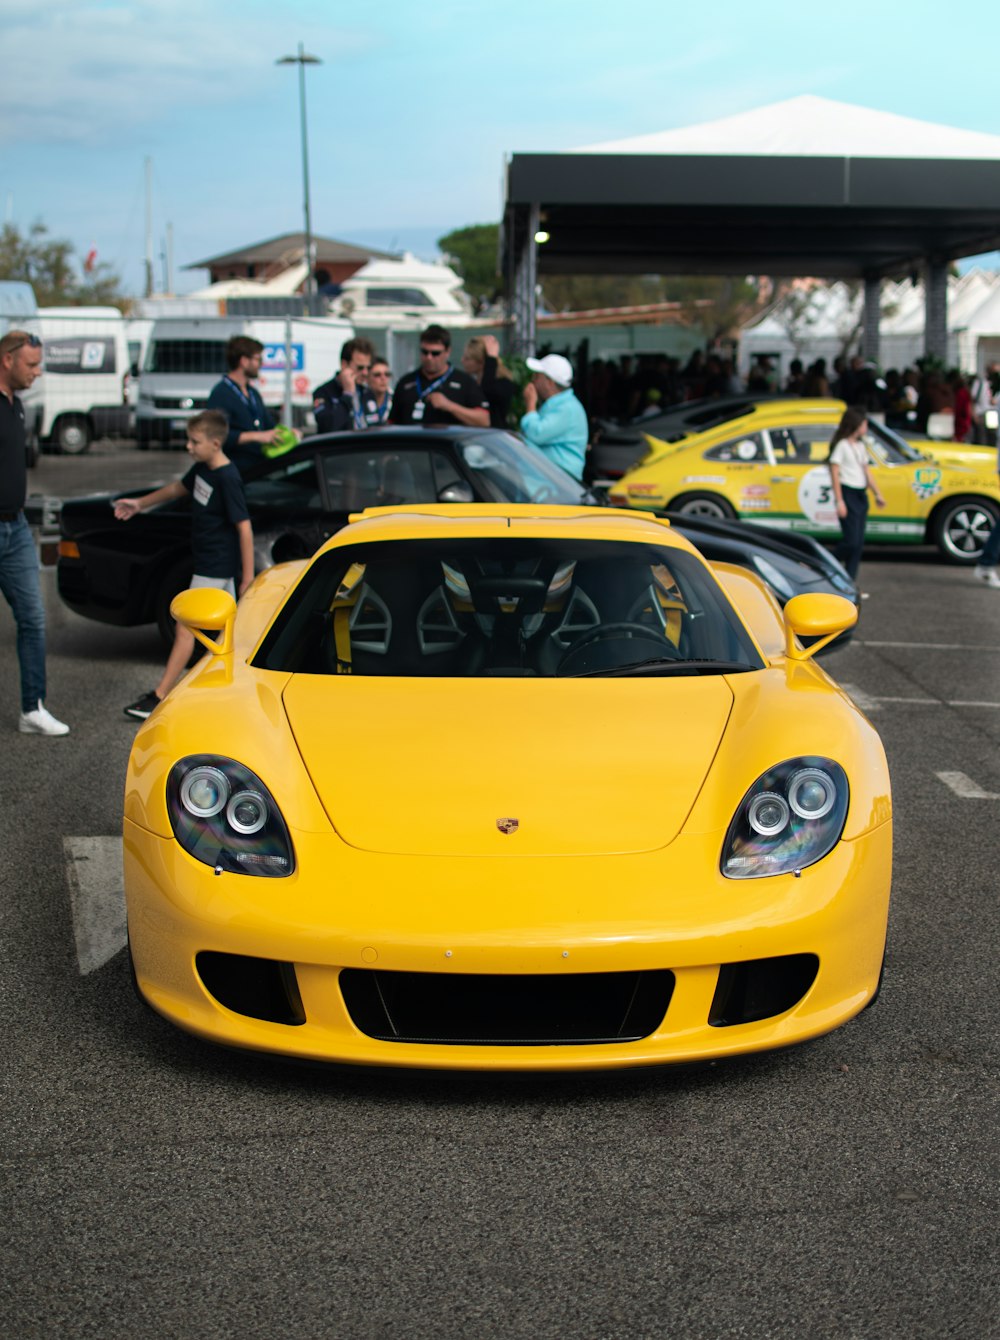 a yellow sports car parked in a parking lot with people and cars